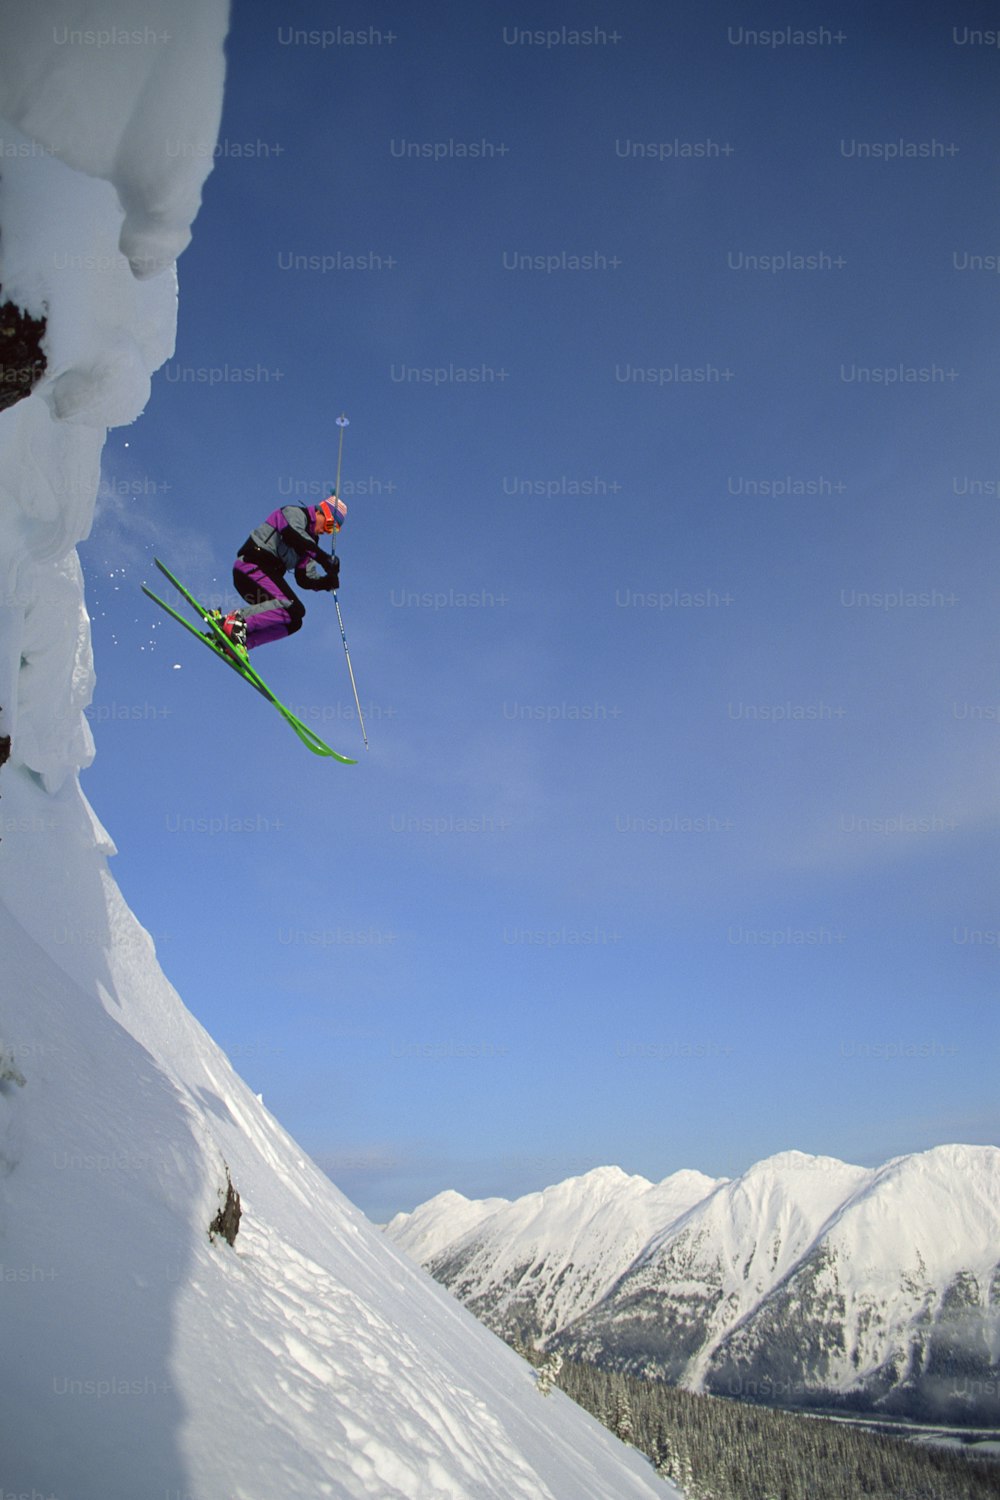 a person jumping in the air on a pair of skis